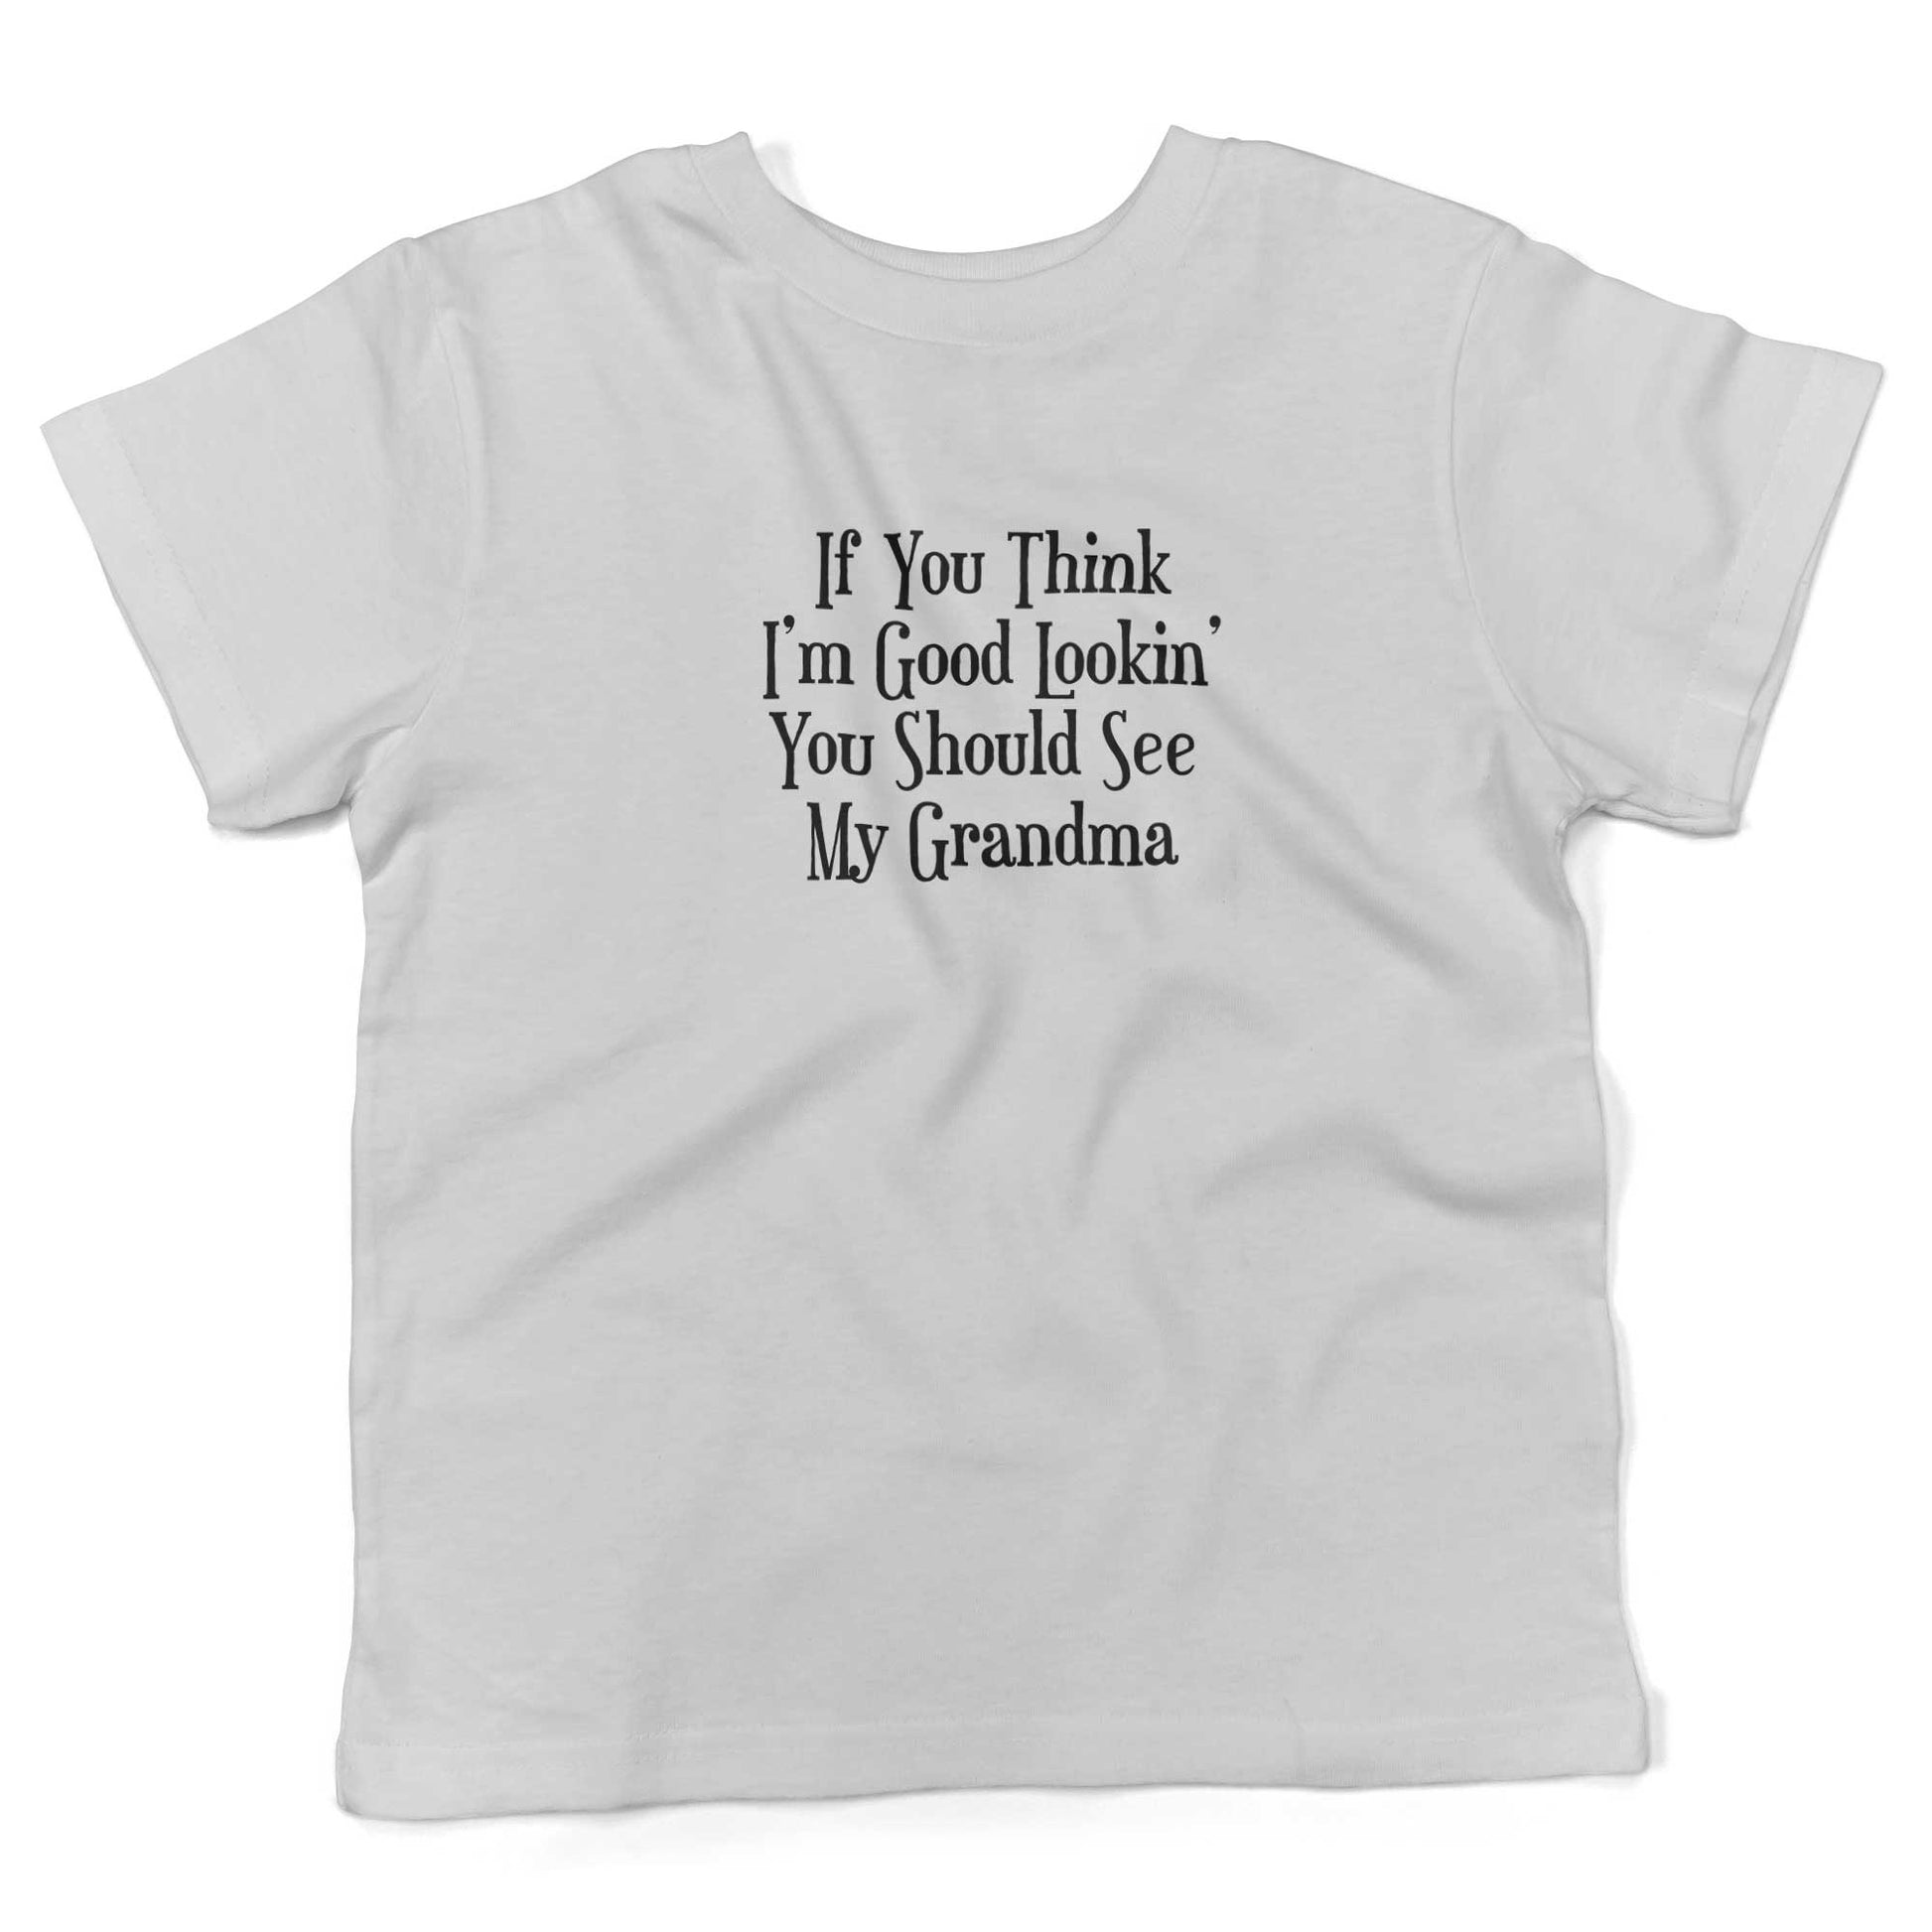 If You Think I'm Good Lookin', You Should See My Grandma Toddler Shirt-White-2T